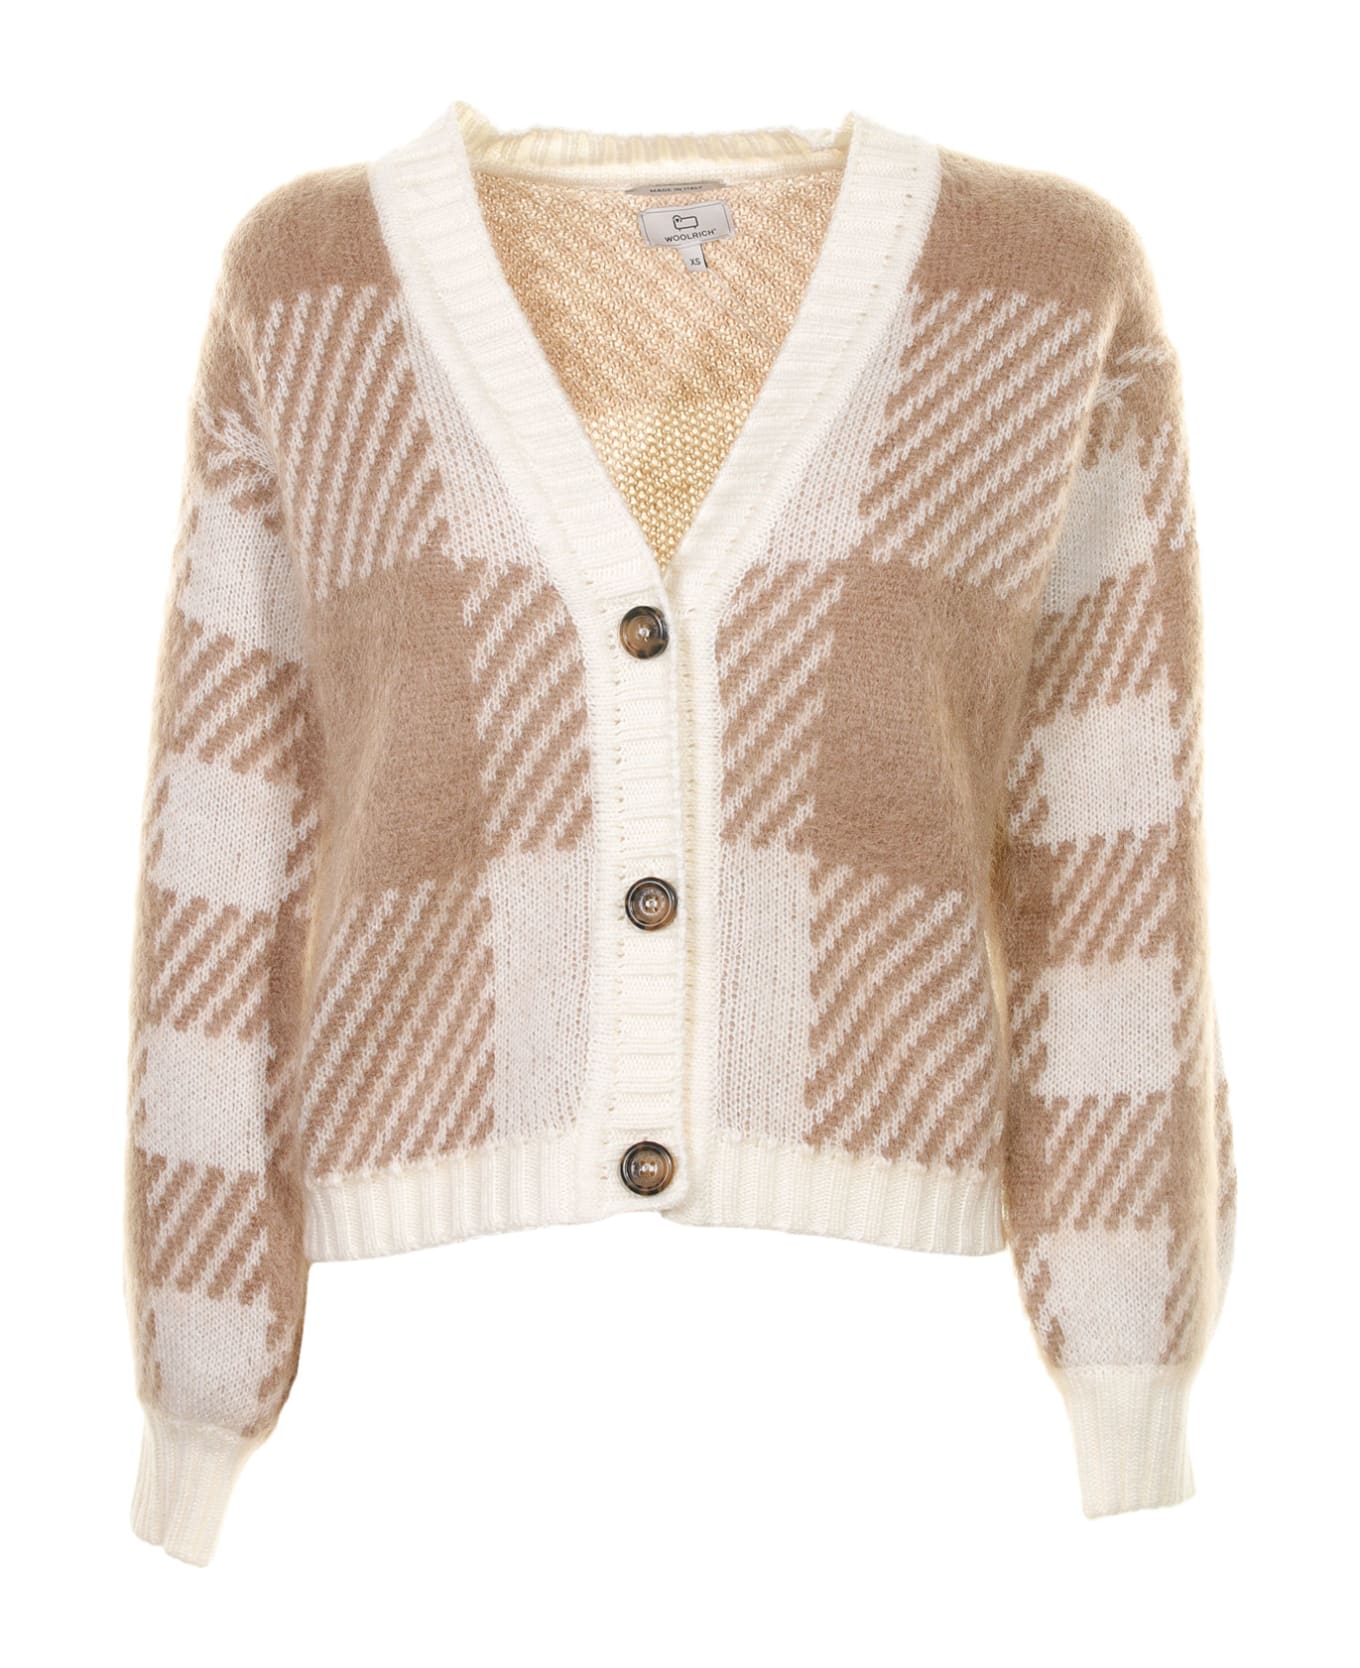 Woolrich Cardigan With Check Pattern | italist